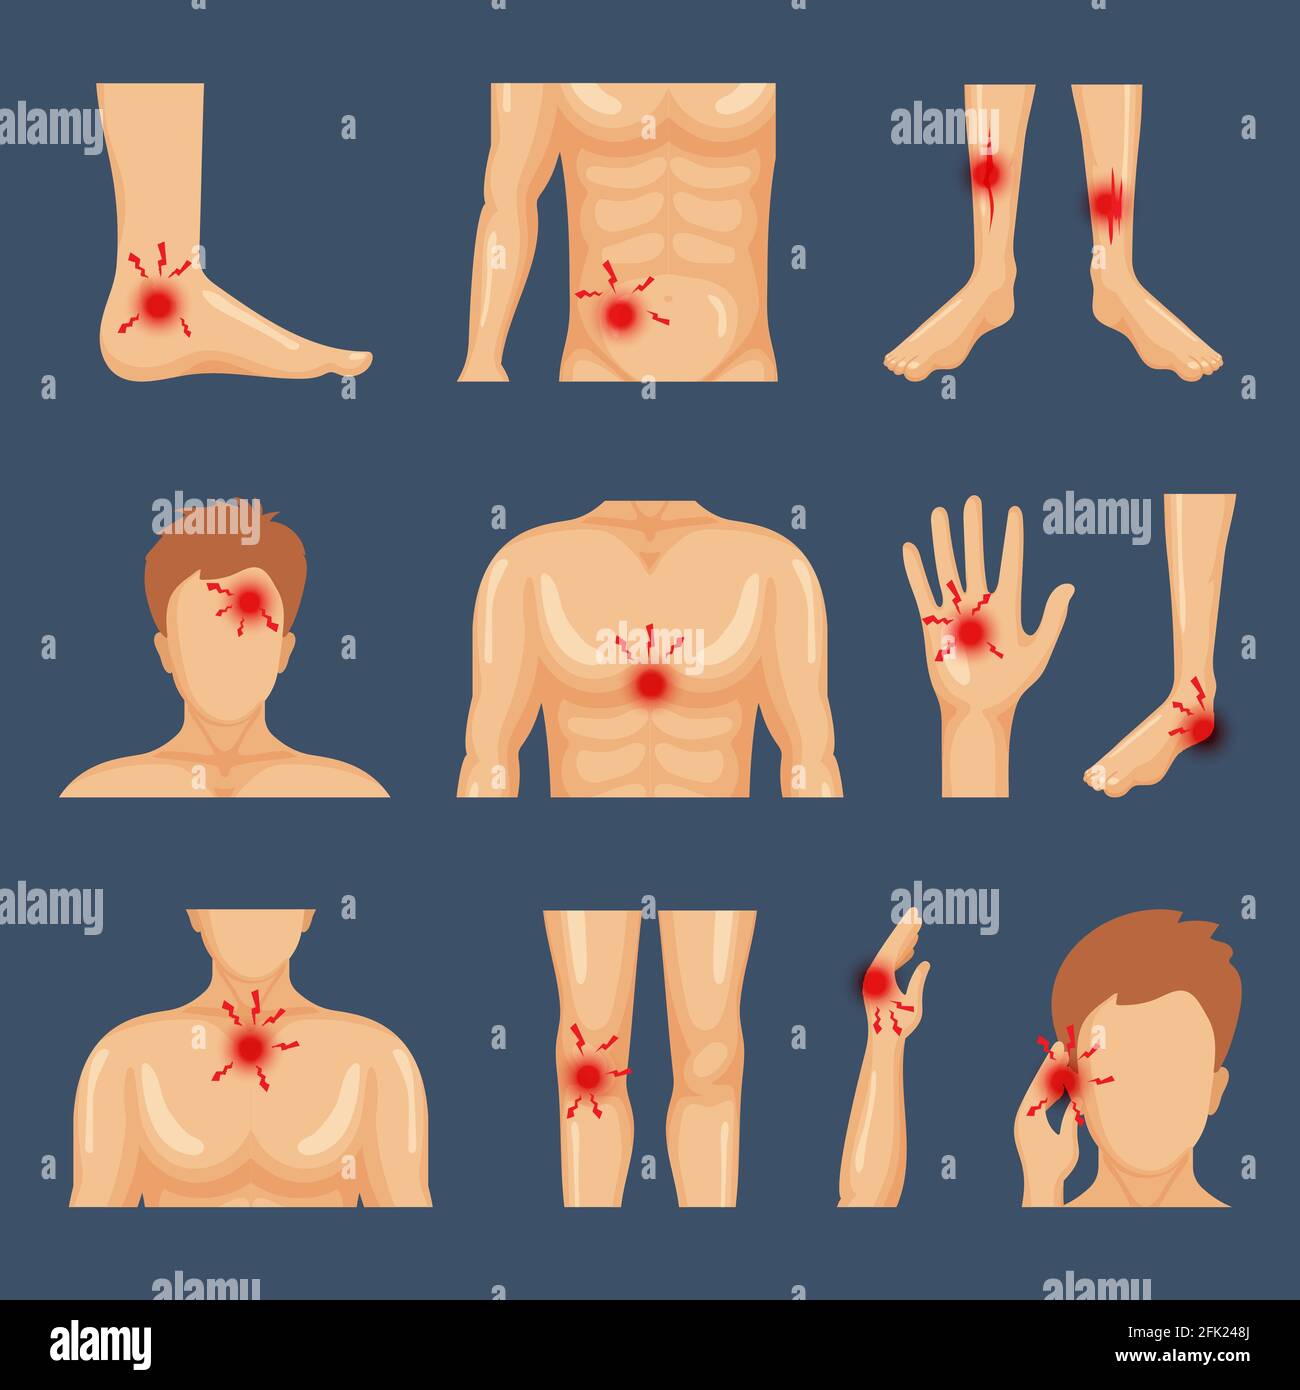 Physical injury. Body parts shoulders trauma pain legs healthy lifestyle flat symbols vector Stock Vector